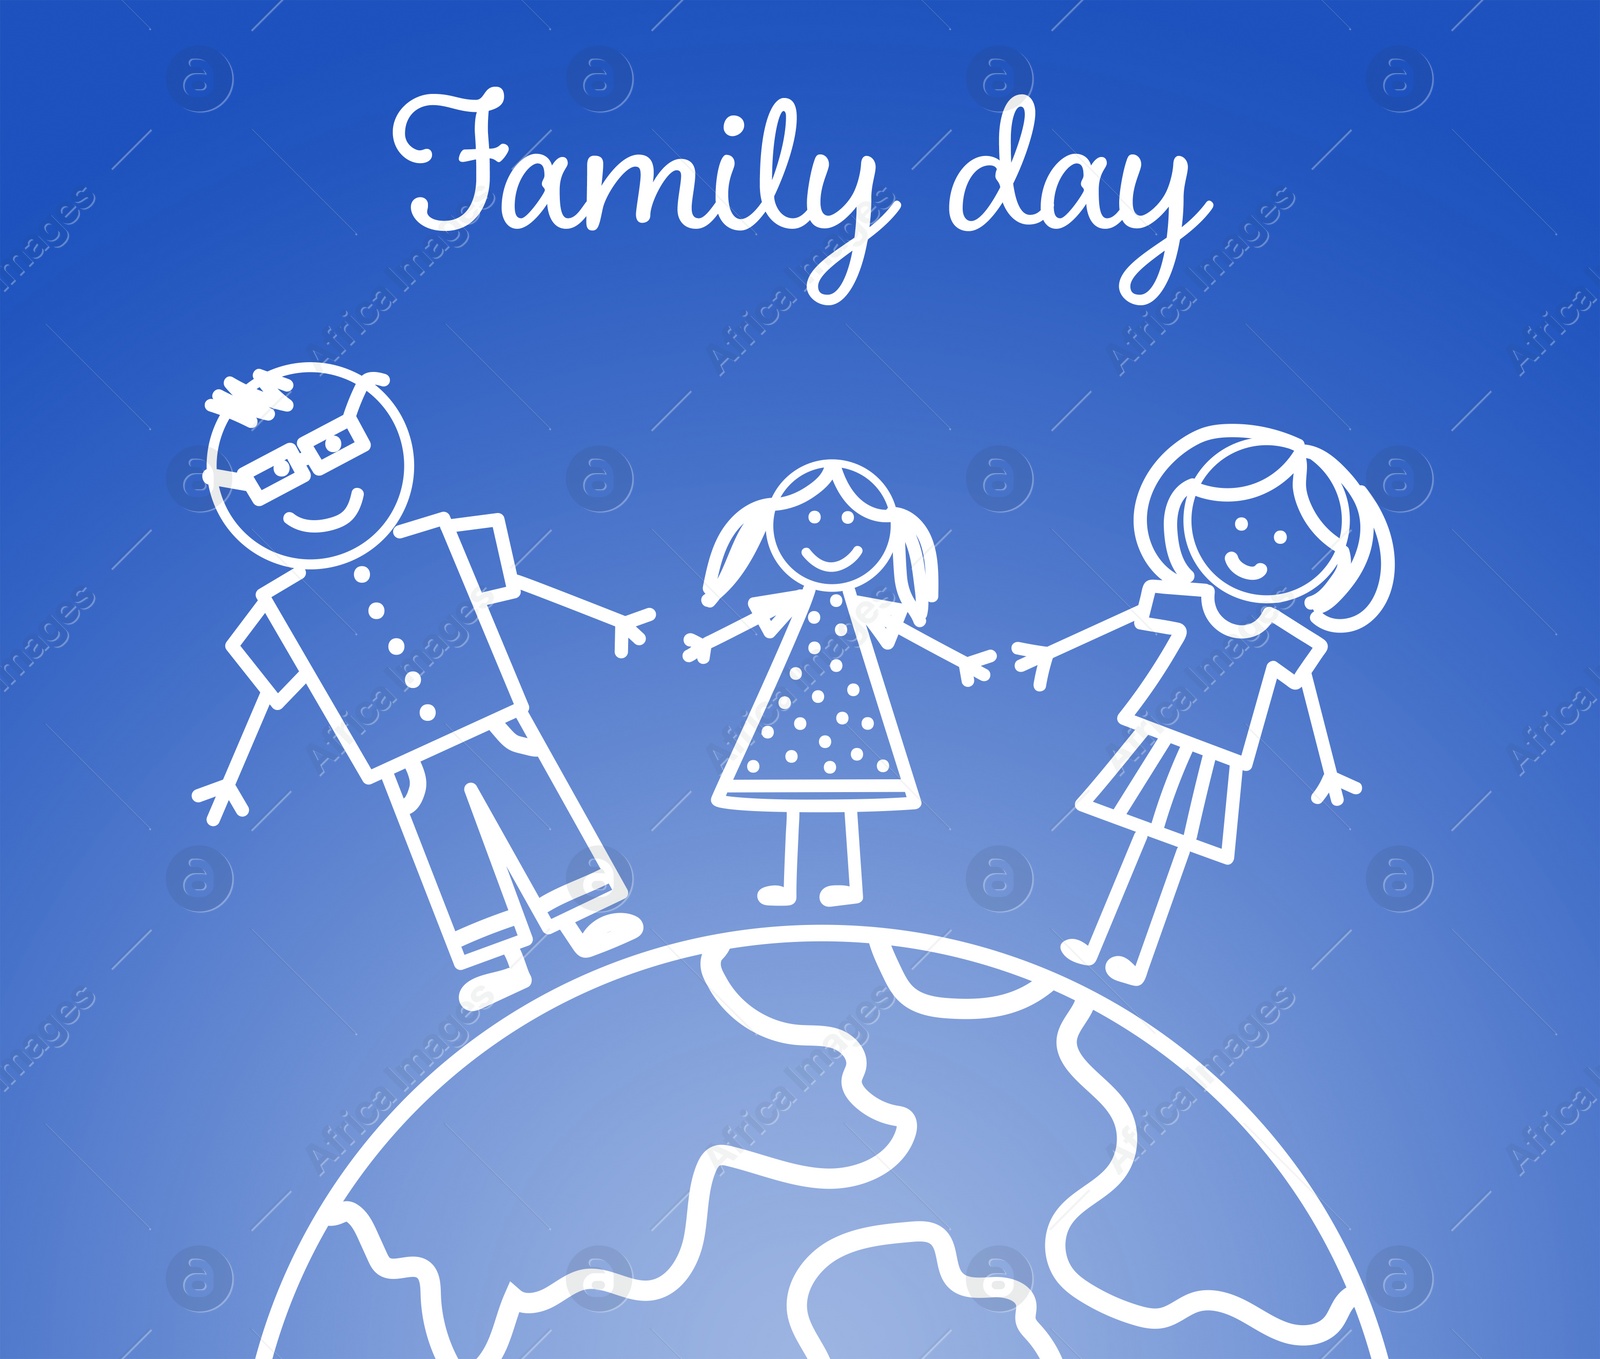 Illustration of Happy Family Day.  parents with their daughter standing on Earth against light blue background